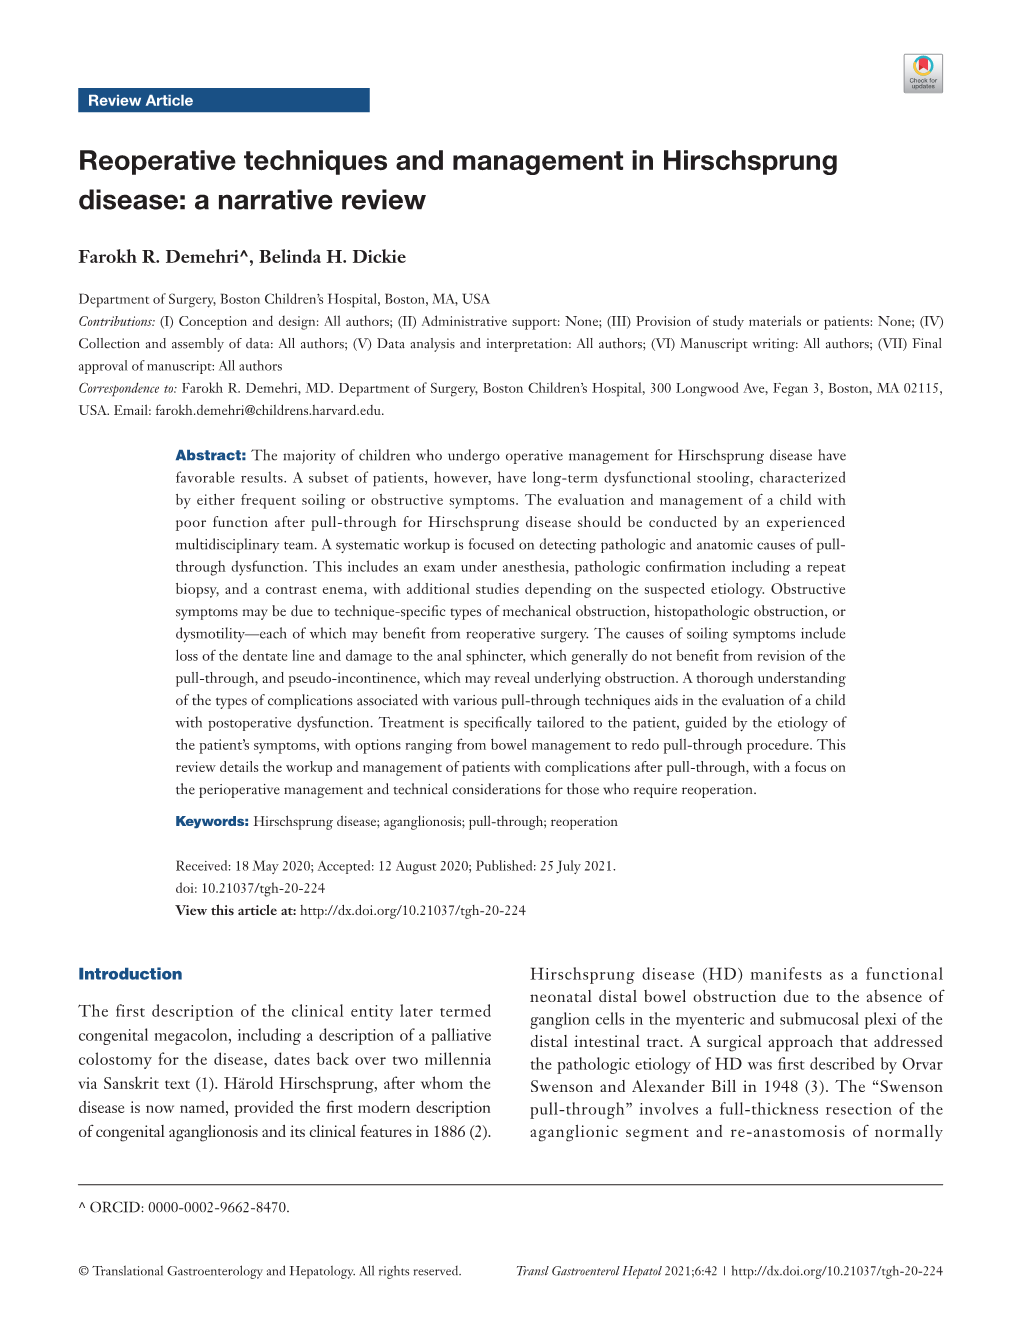 Reoperative Techniques and Management in Hirschsprung Disease: a Narrative Review